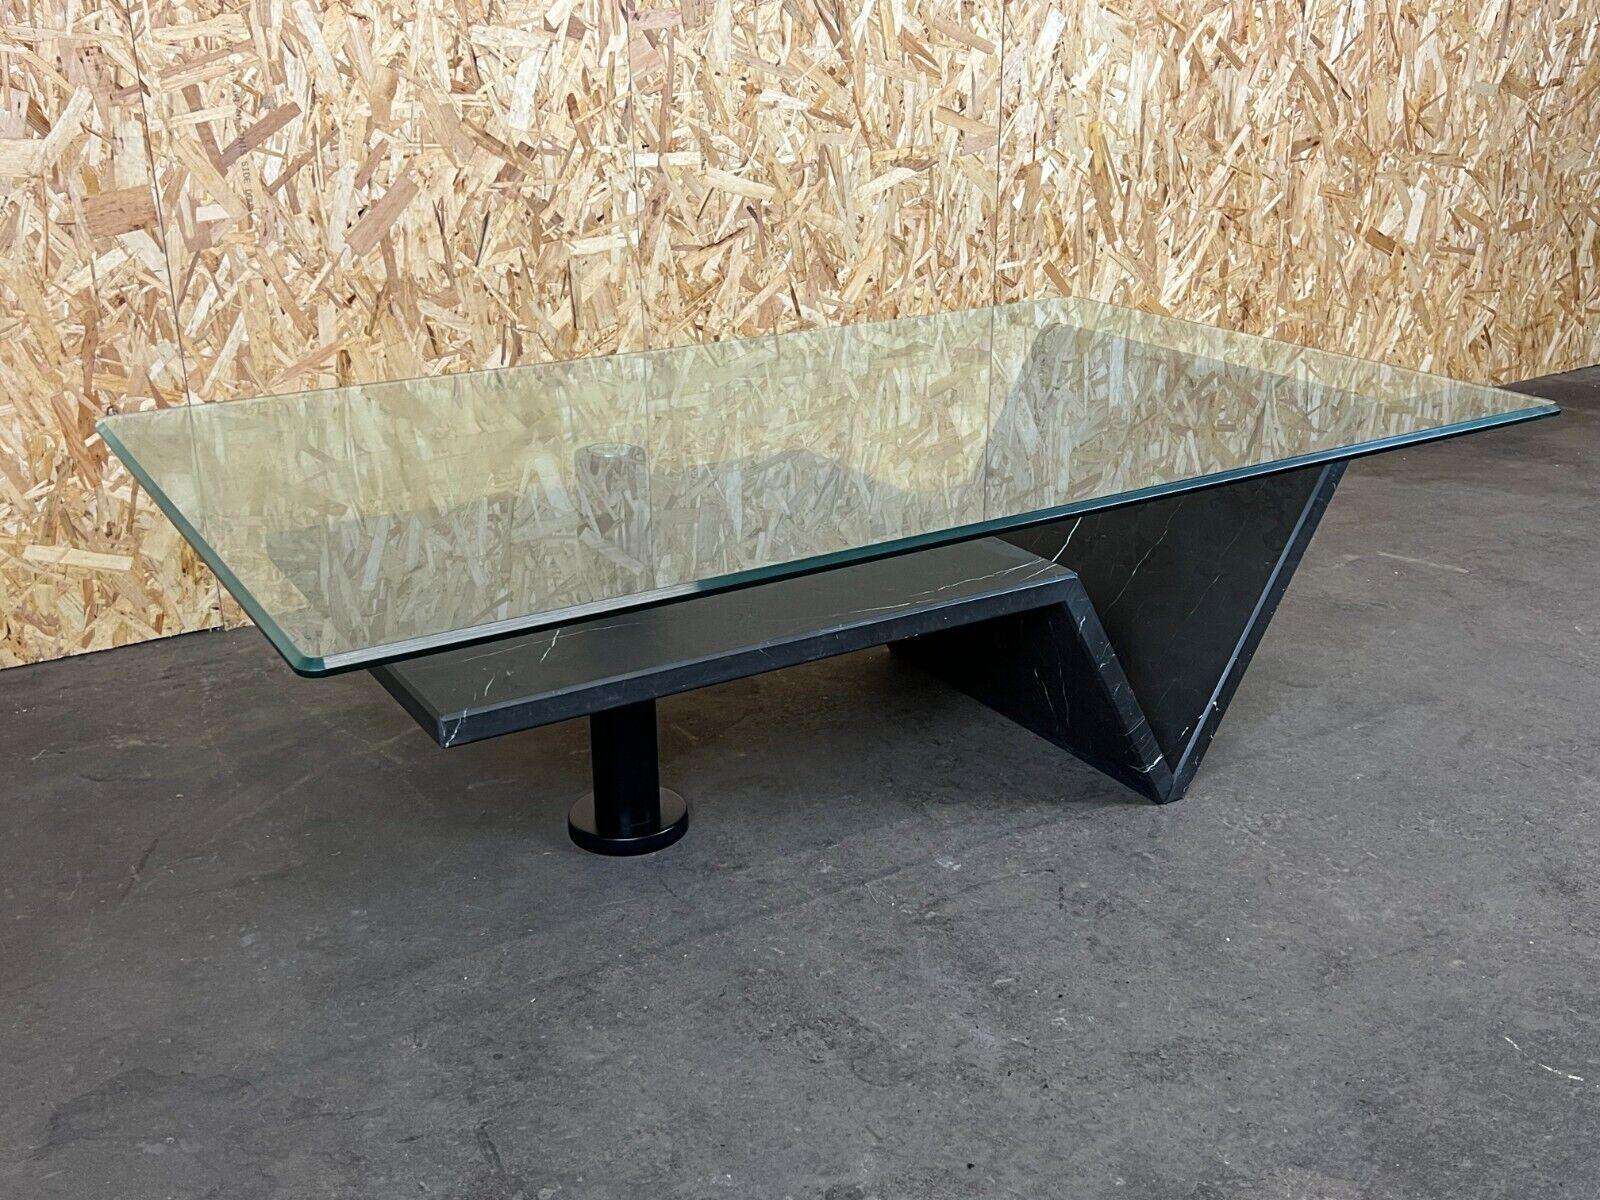 60s 70s Marble Table Coffee Table Glass Table Marble Space Age Design In Good Condition For Sale In Neuenkirchen, NI